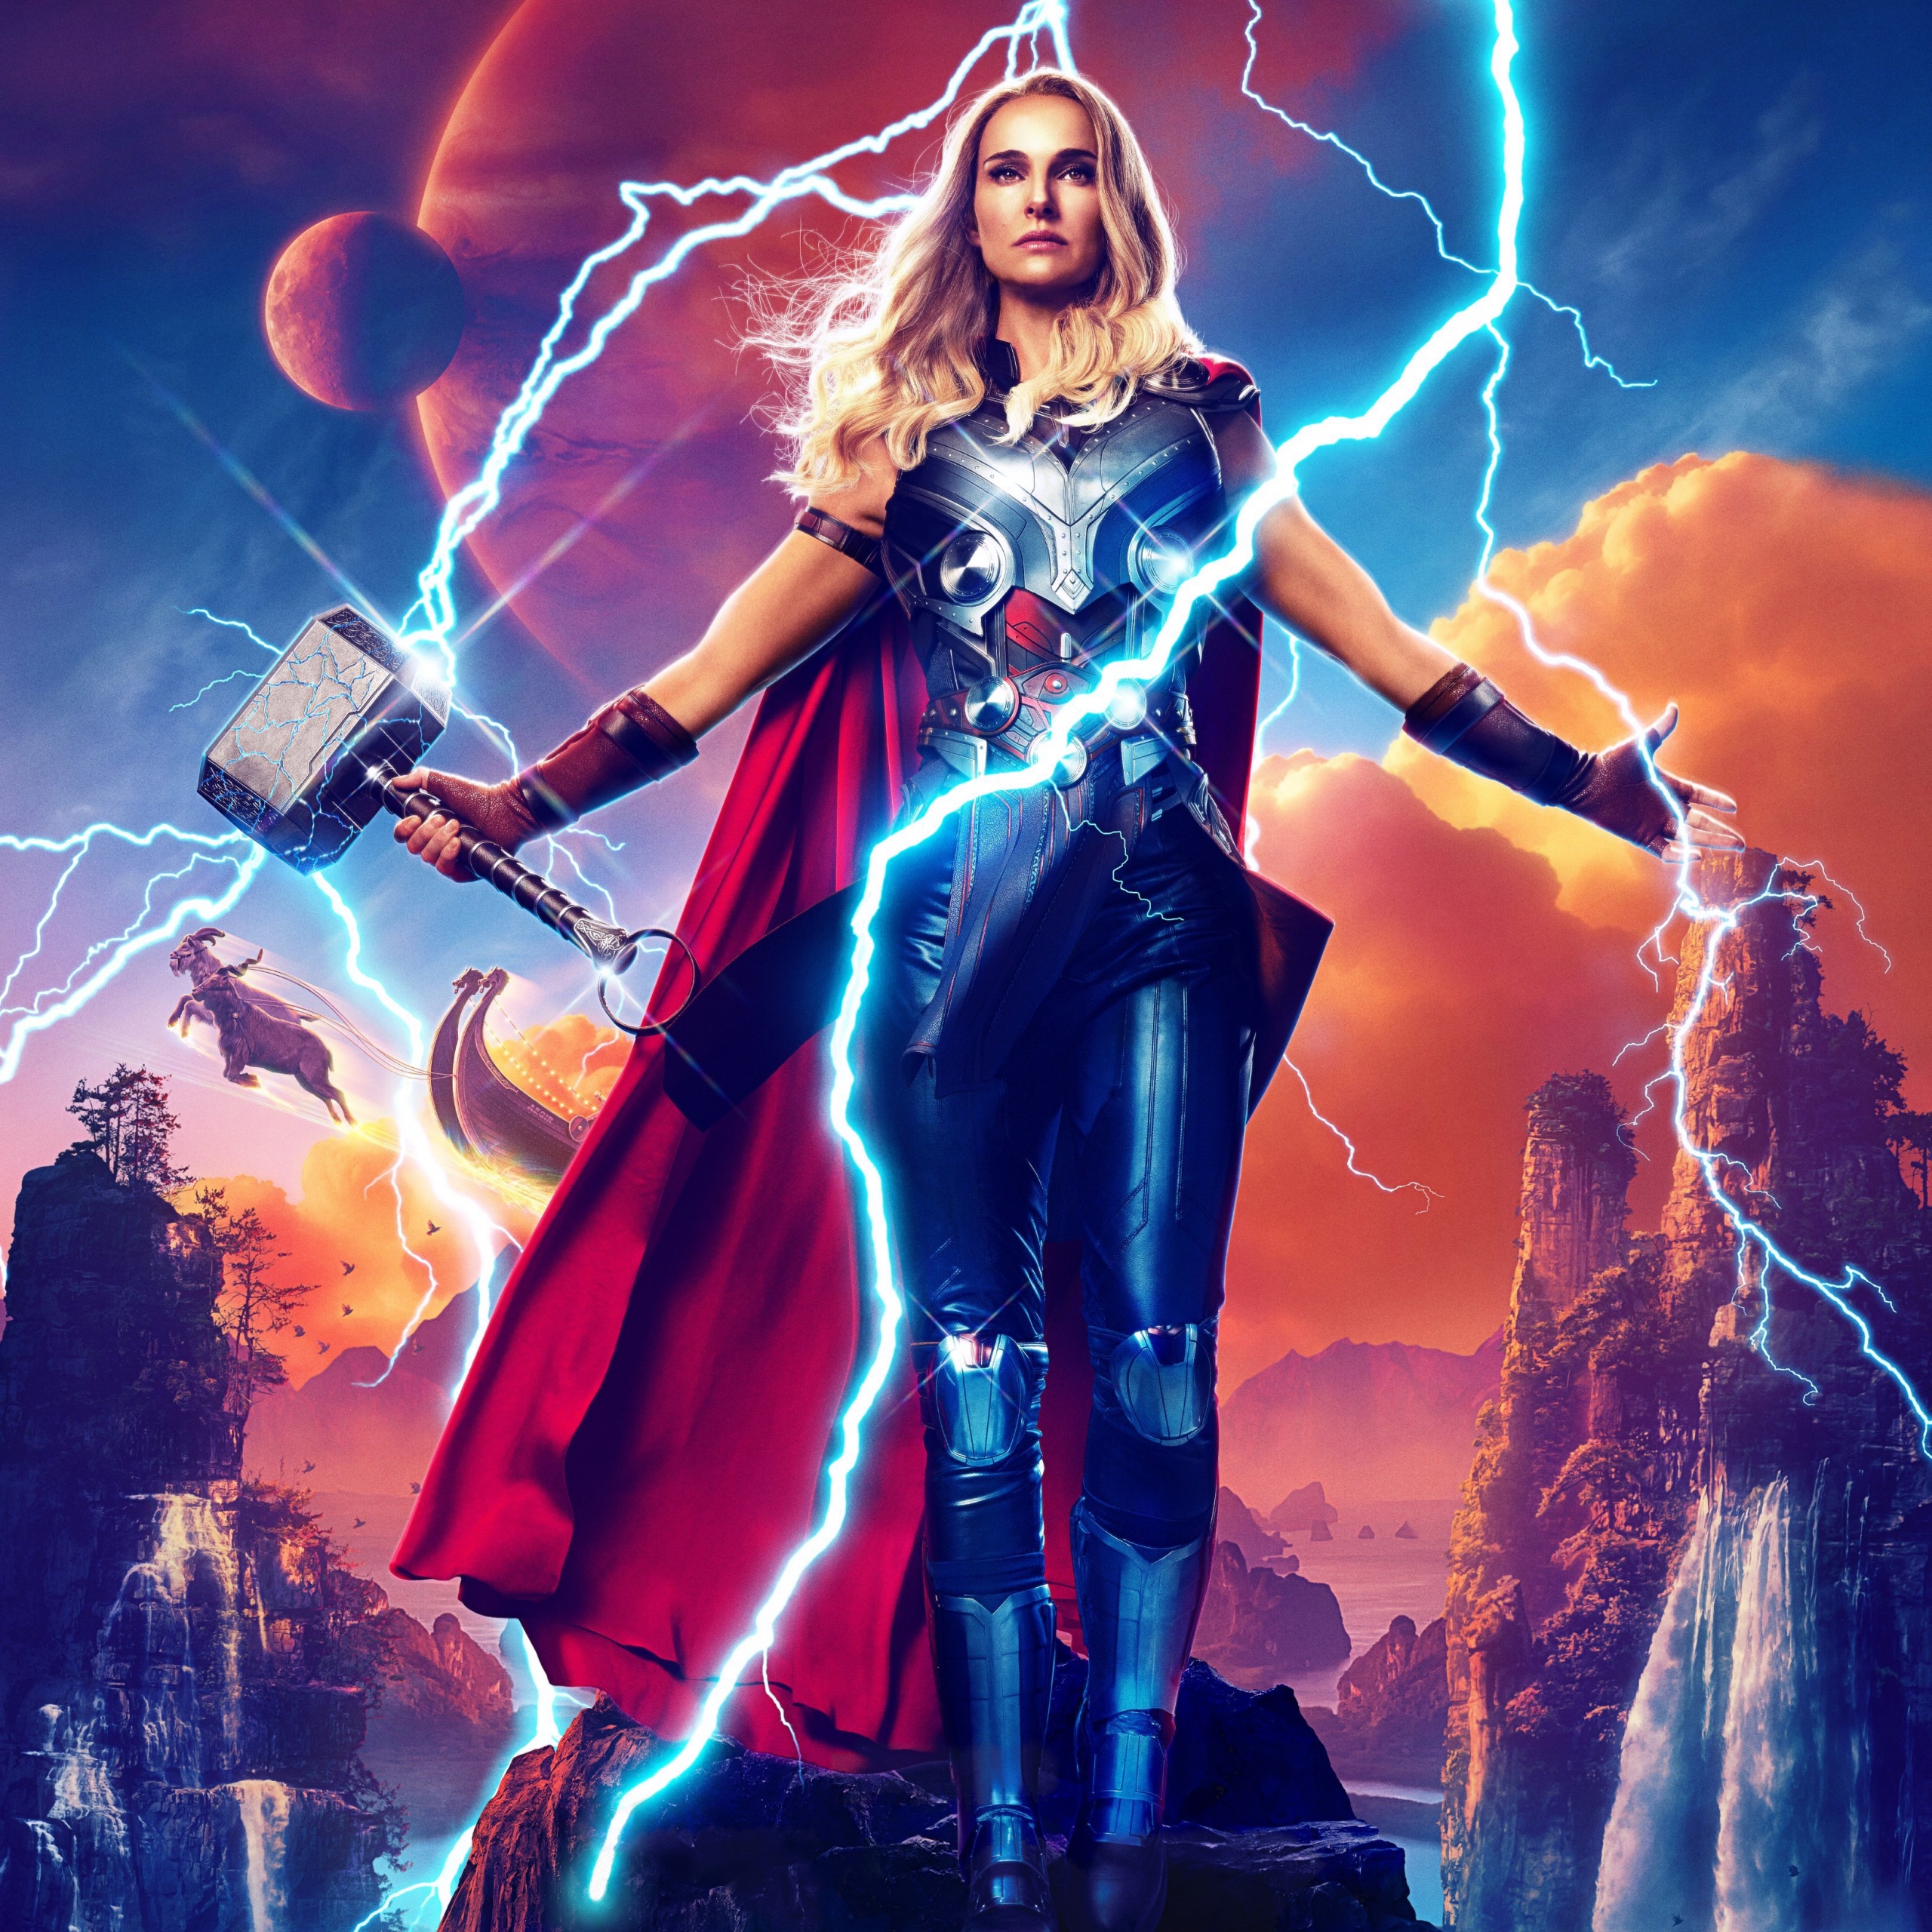 Thor: Love and Thunder Wallpapers 4K, Natalie Portman as Jane Foster, 2022 Movies, Movies,